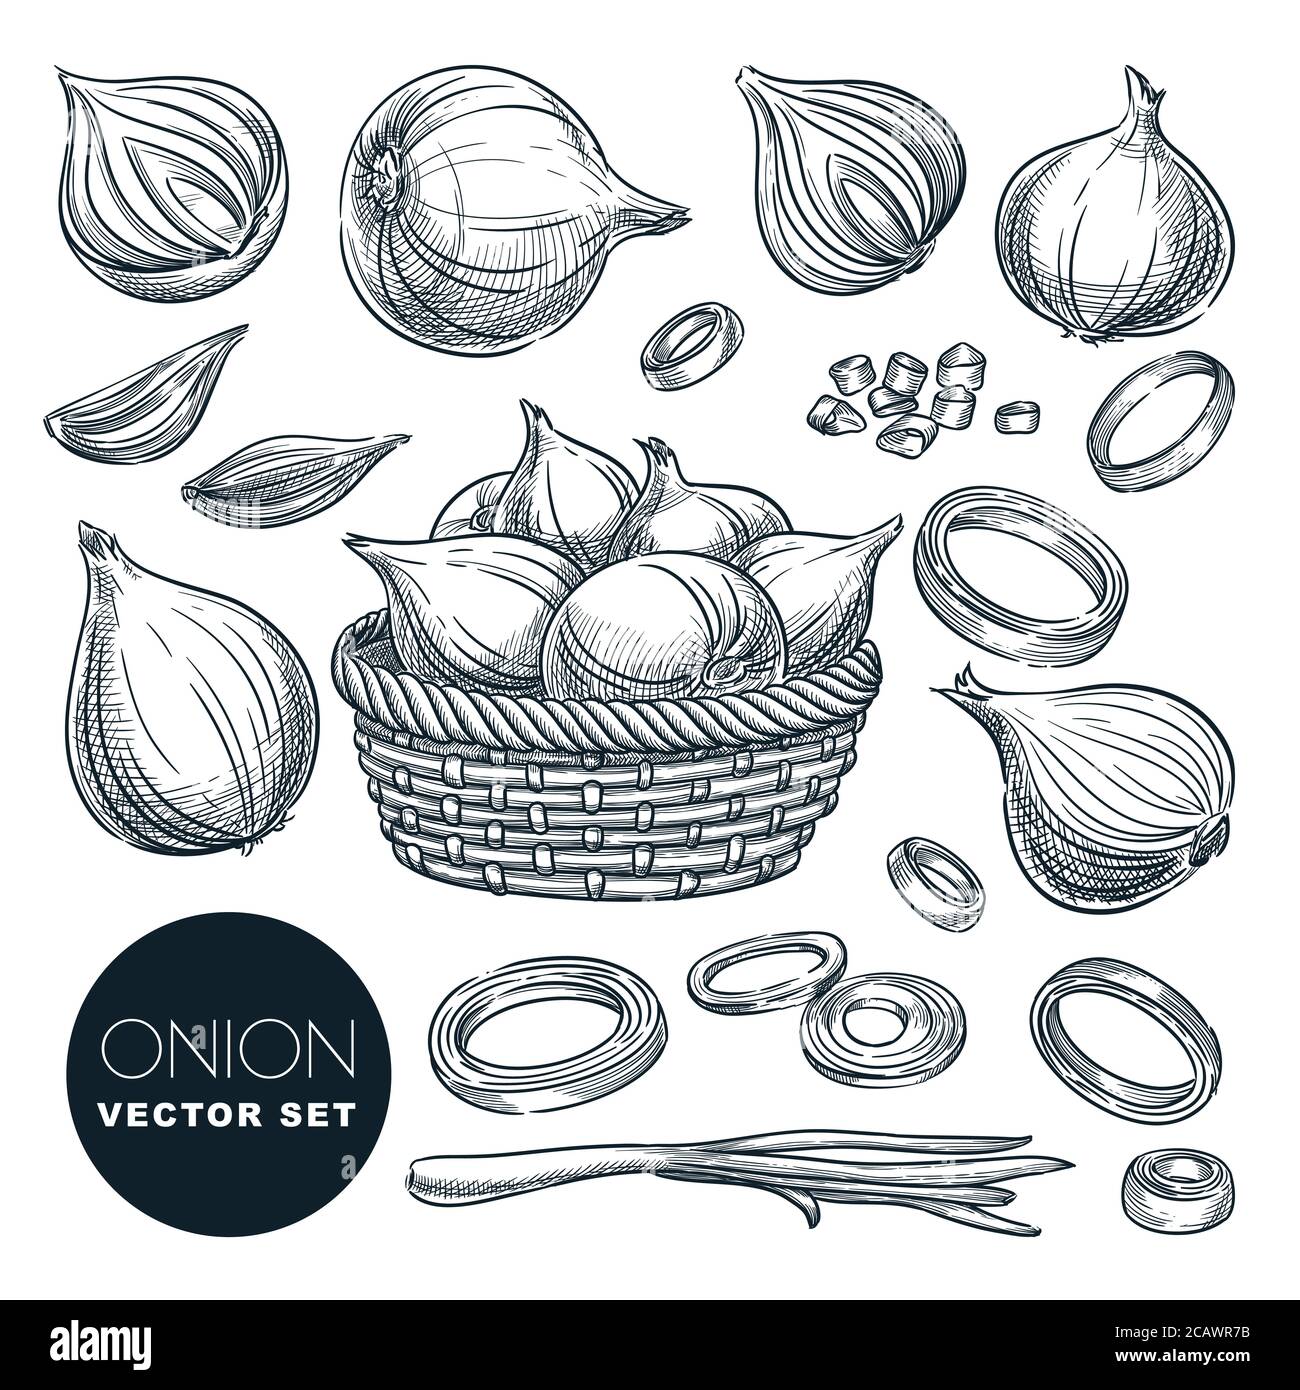 Onion head and green feathers, isolated on white background. Sketch vector illustration. Fresh spice ingredients and salad vegetables. Hand drawn agri Stock Vector